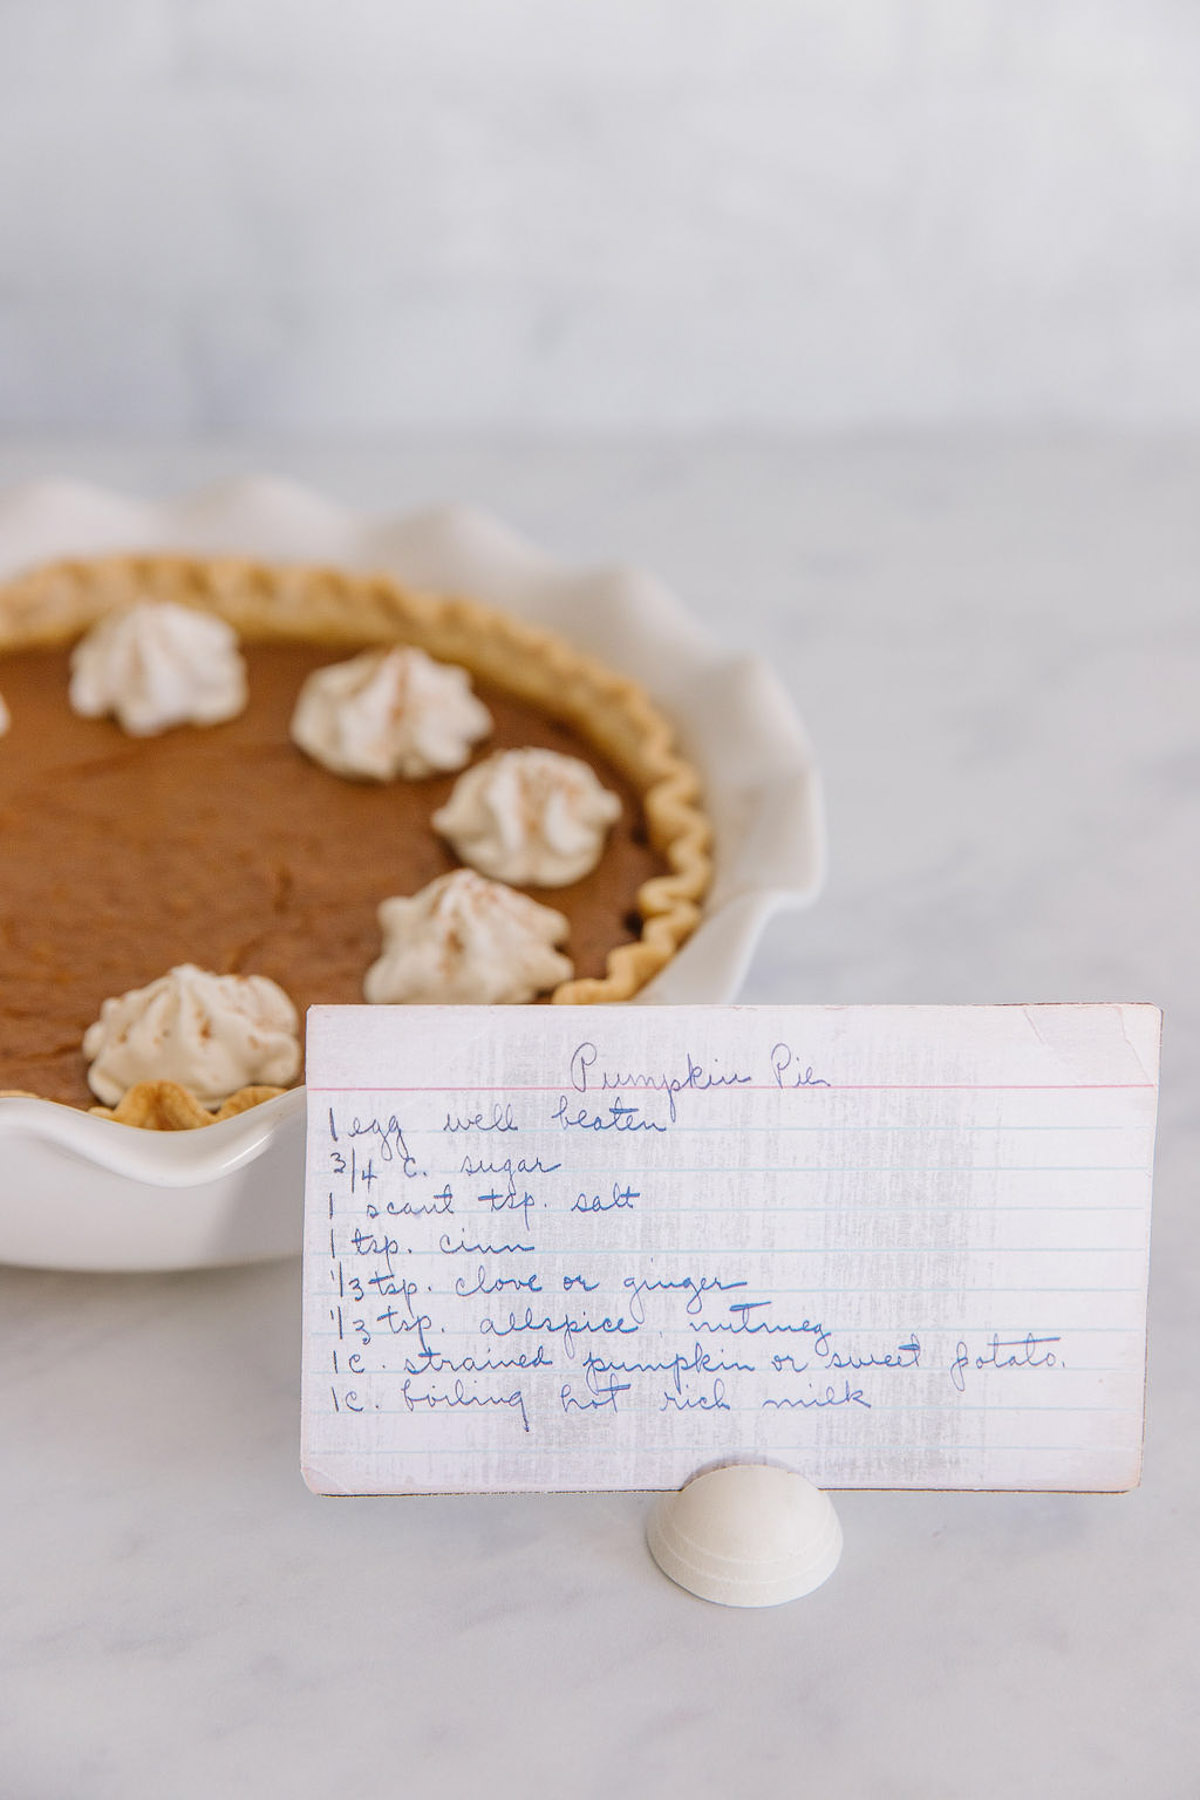 A white pan holding a fresh pumpkin pie with whipped cream dollops on it with a handwritten recipe card in front.